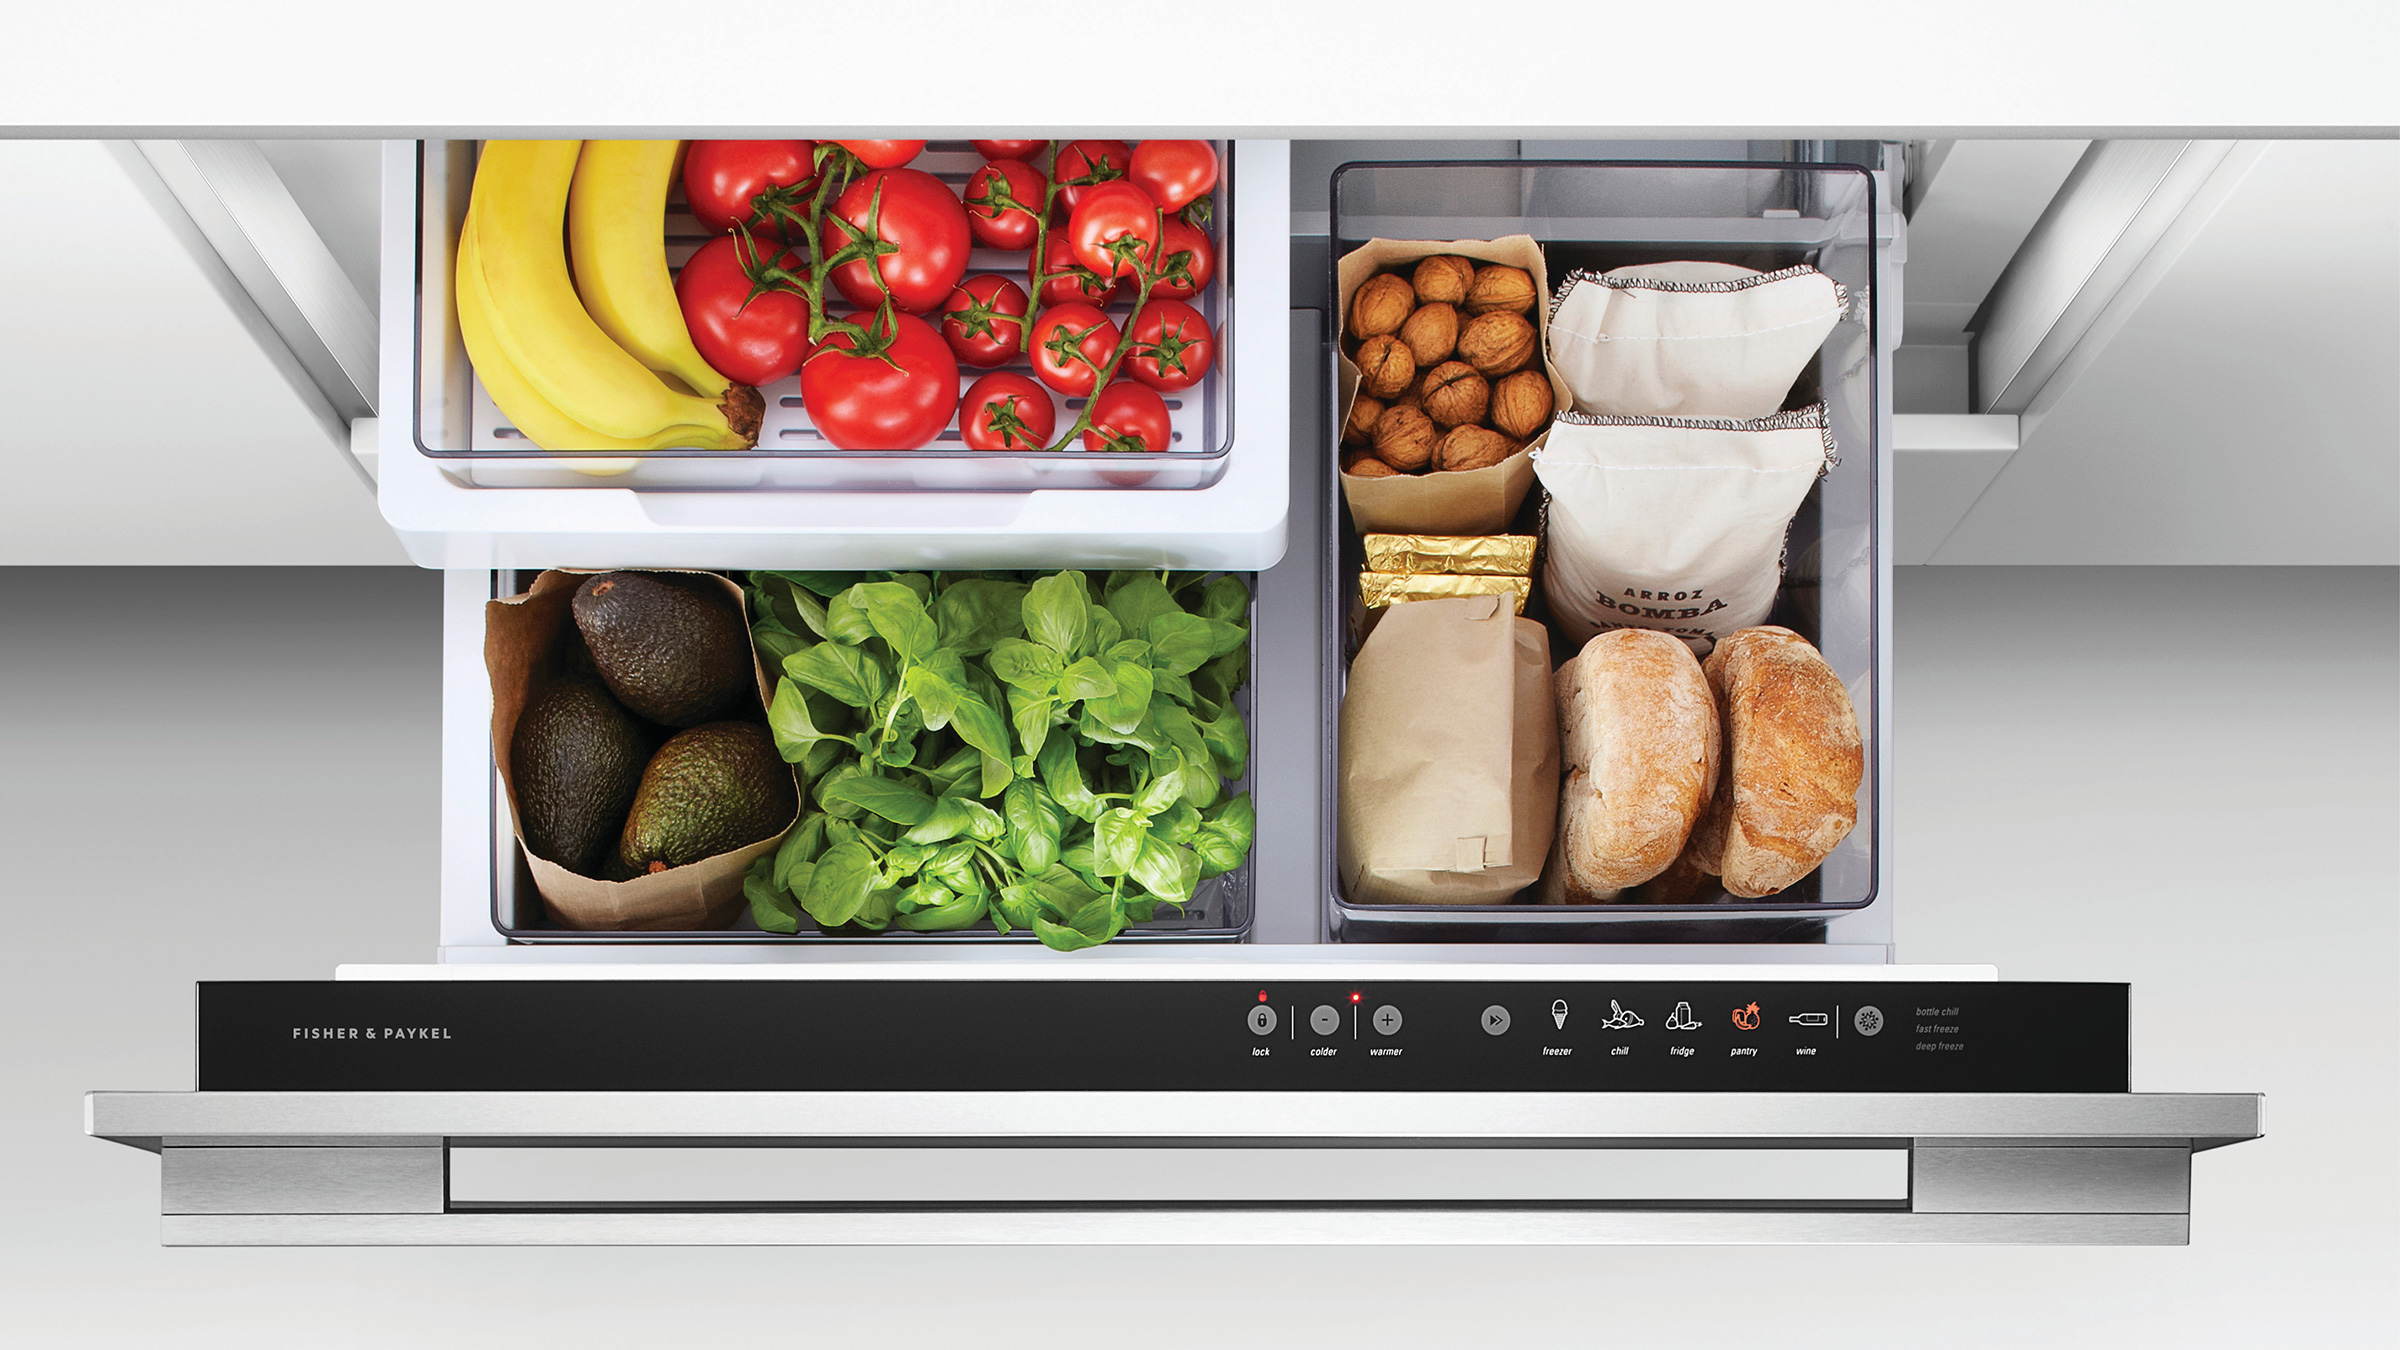 Open refrigeration drawer with fresh fruit, vegetables and bread in three different compartments.